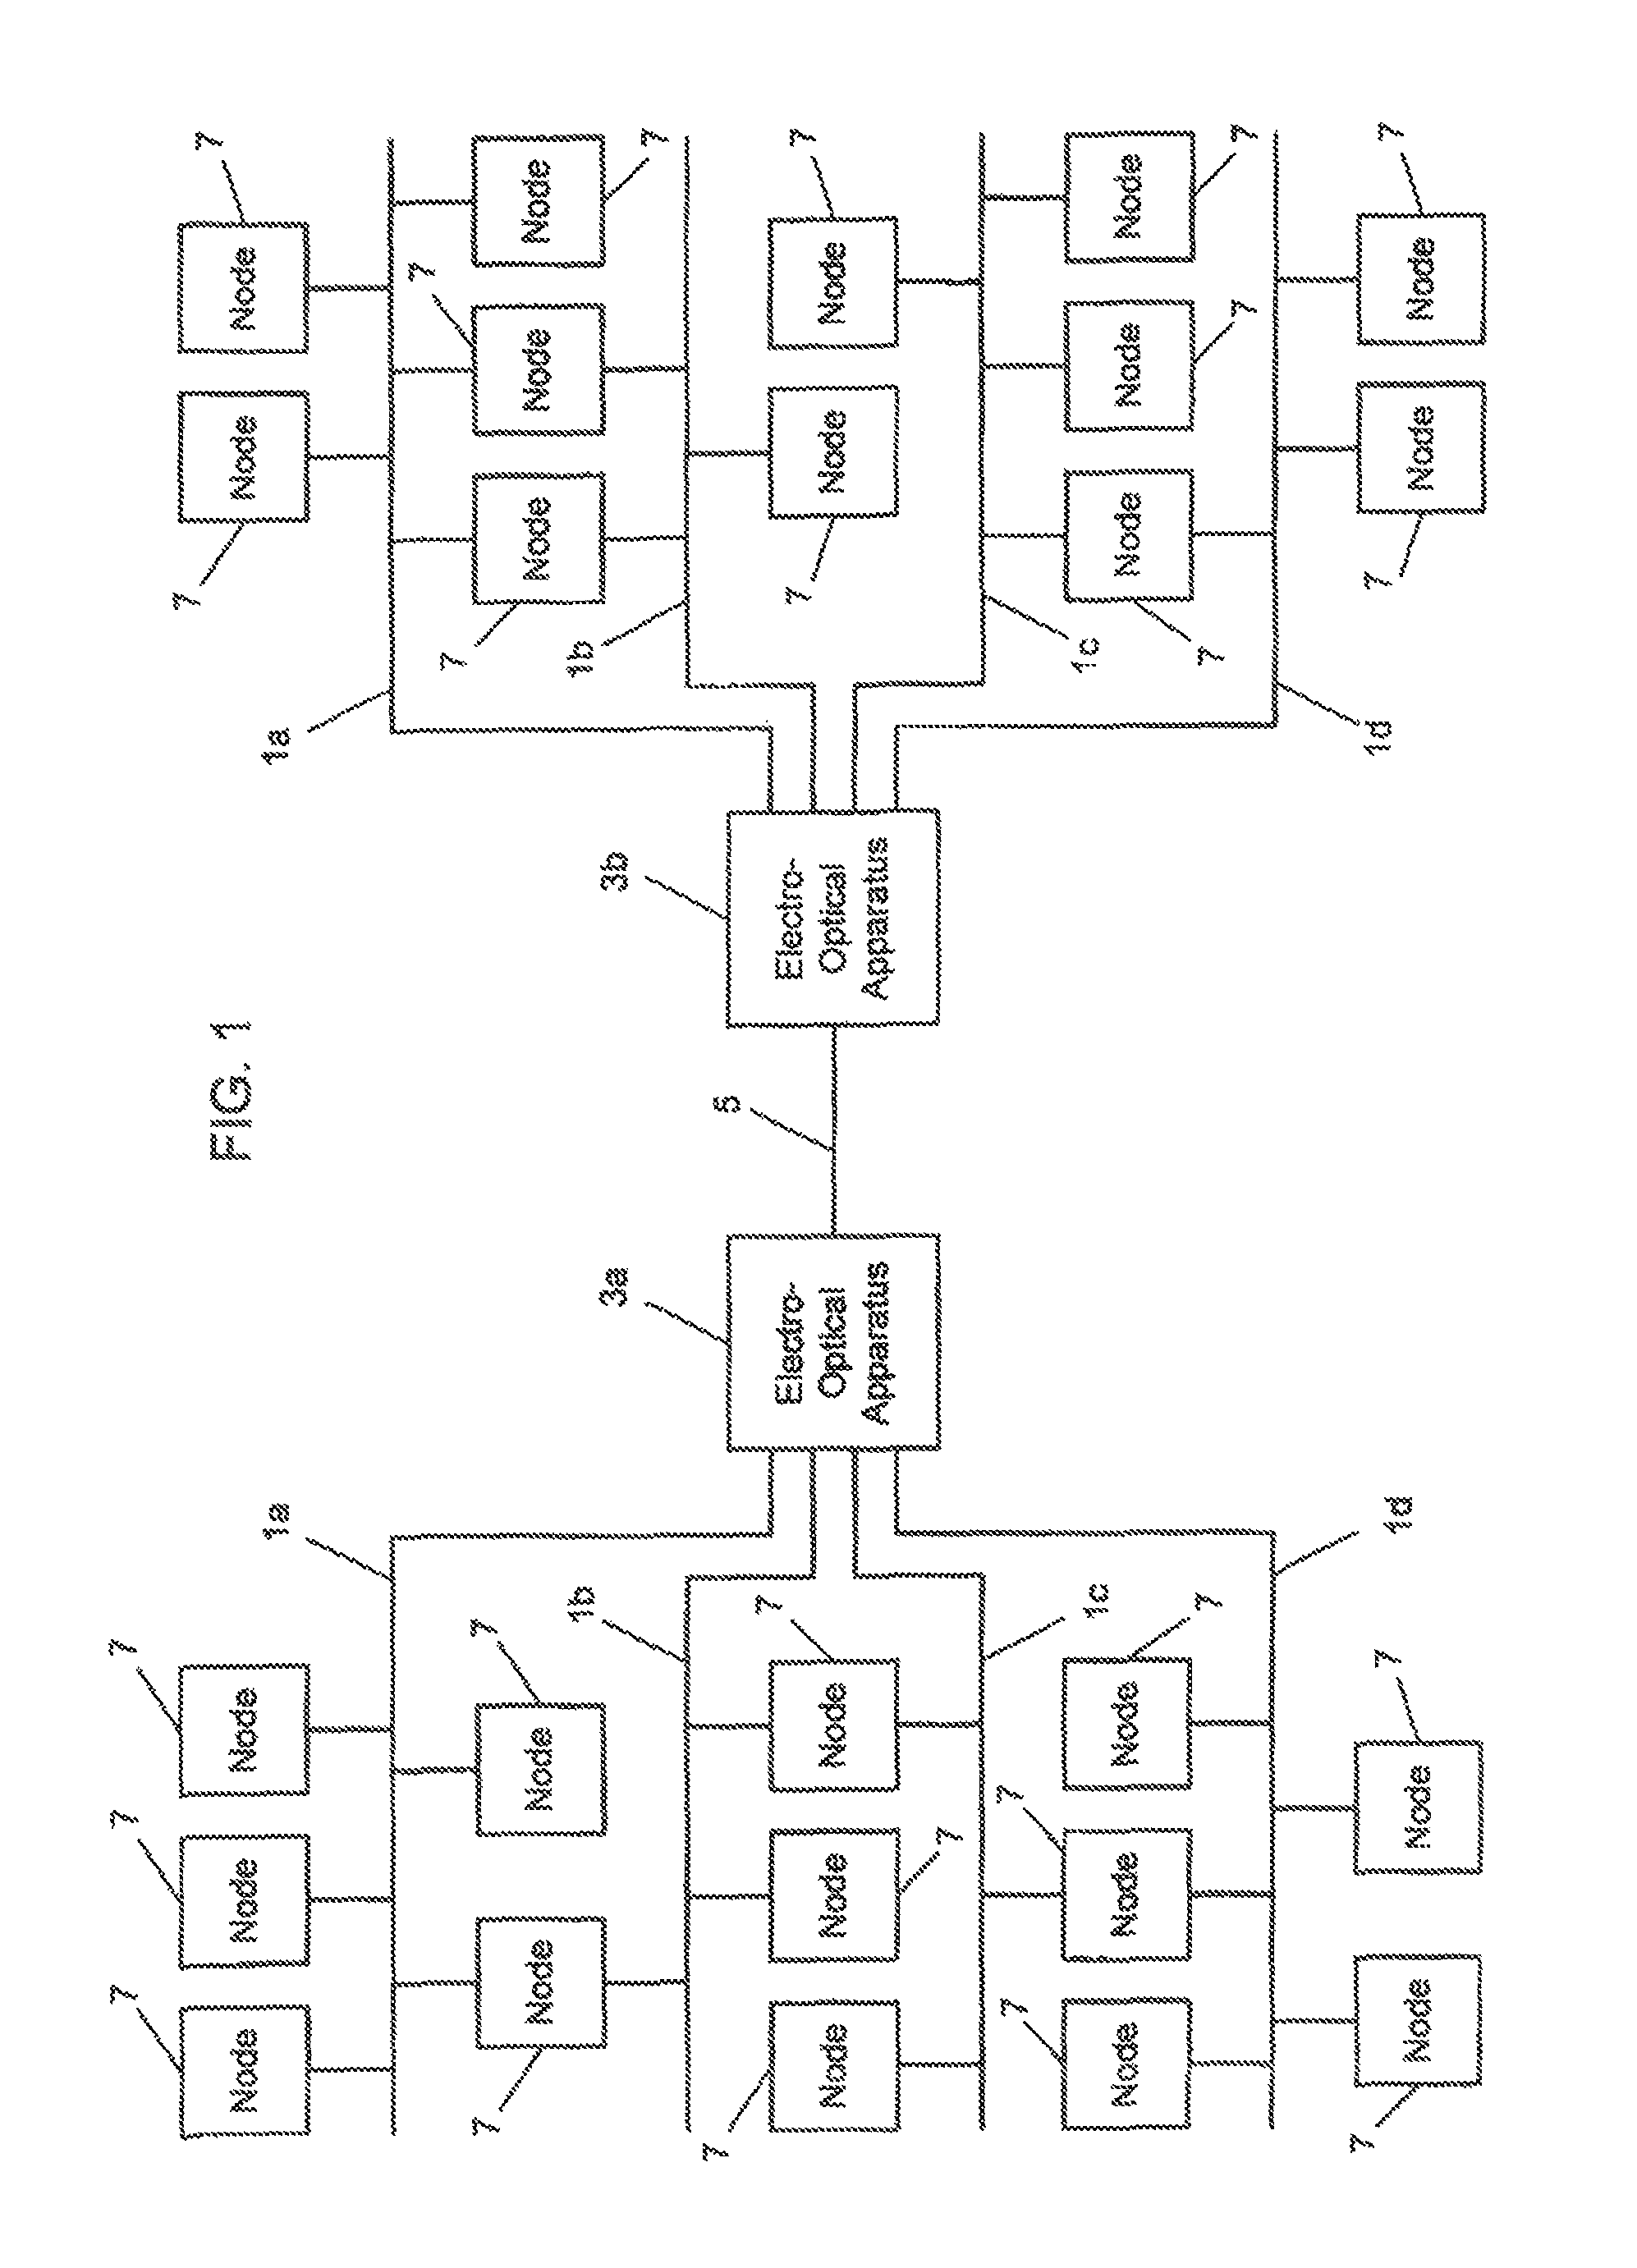 Data communications system including an optical fiber data link disposed between serial bidirectional electrical data busses